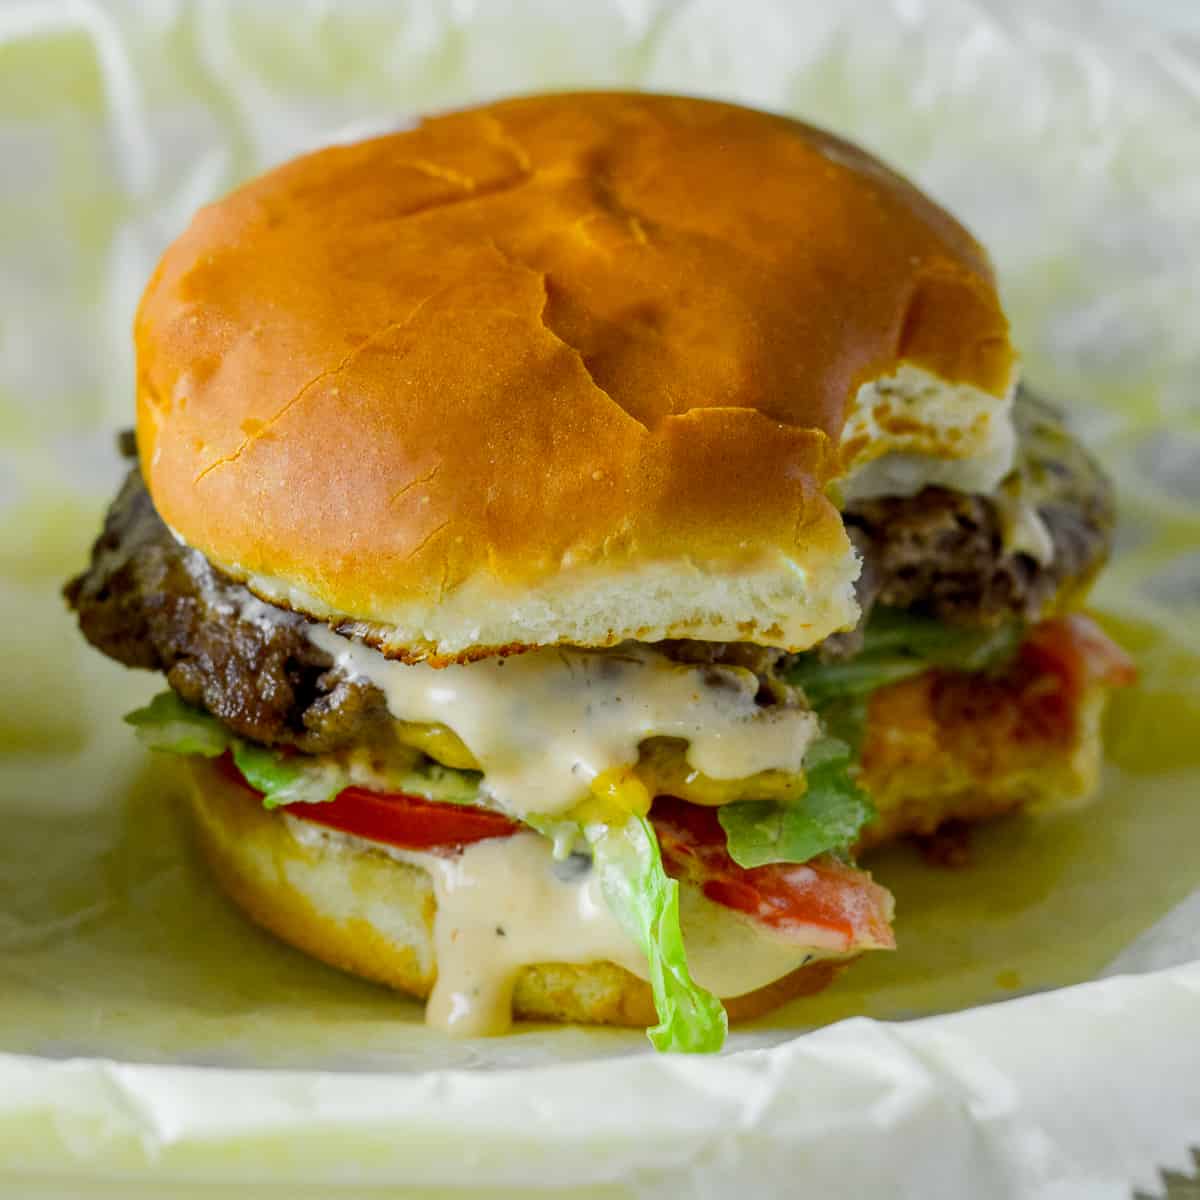 Beef burger with a couple bites in it to look like an In N Out Burger with lettuce, tomato, smashed burger with sauce dripping in a burger basket on top of wax paper